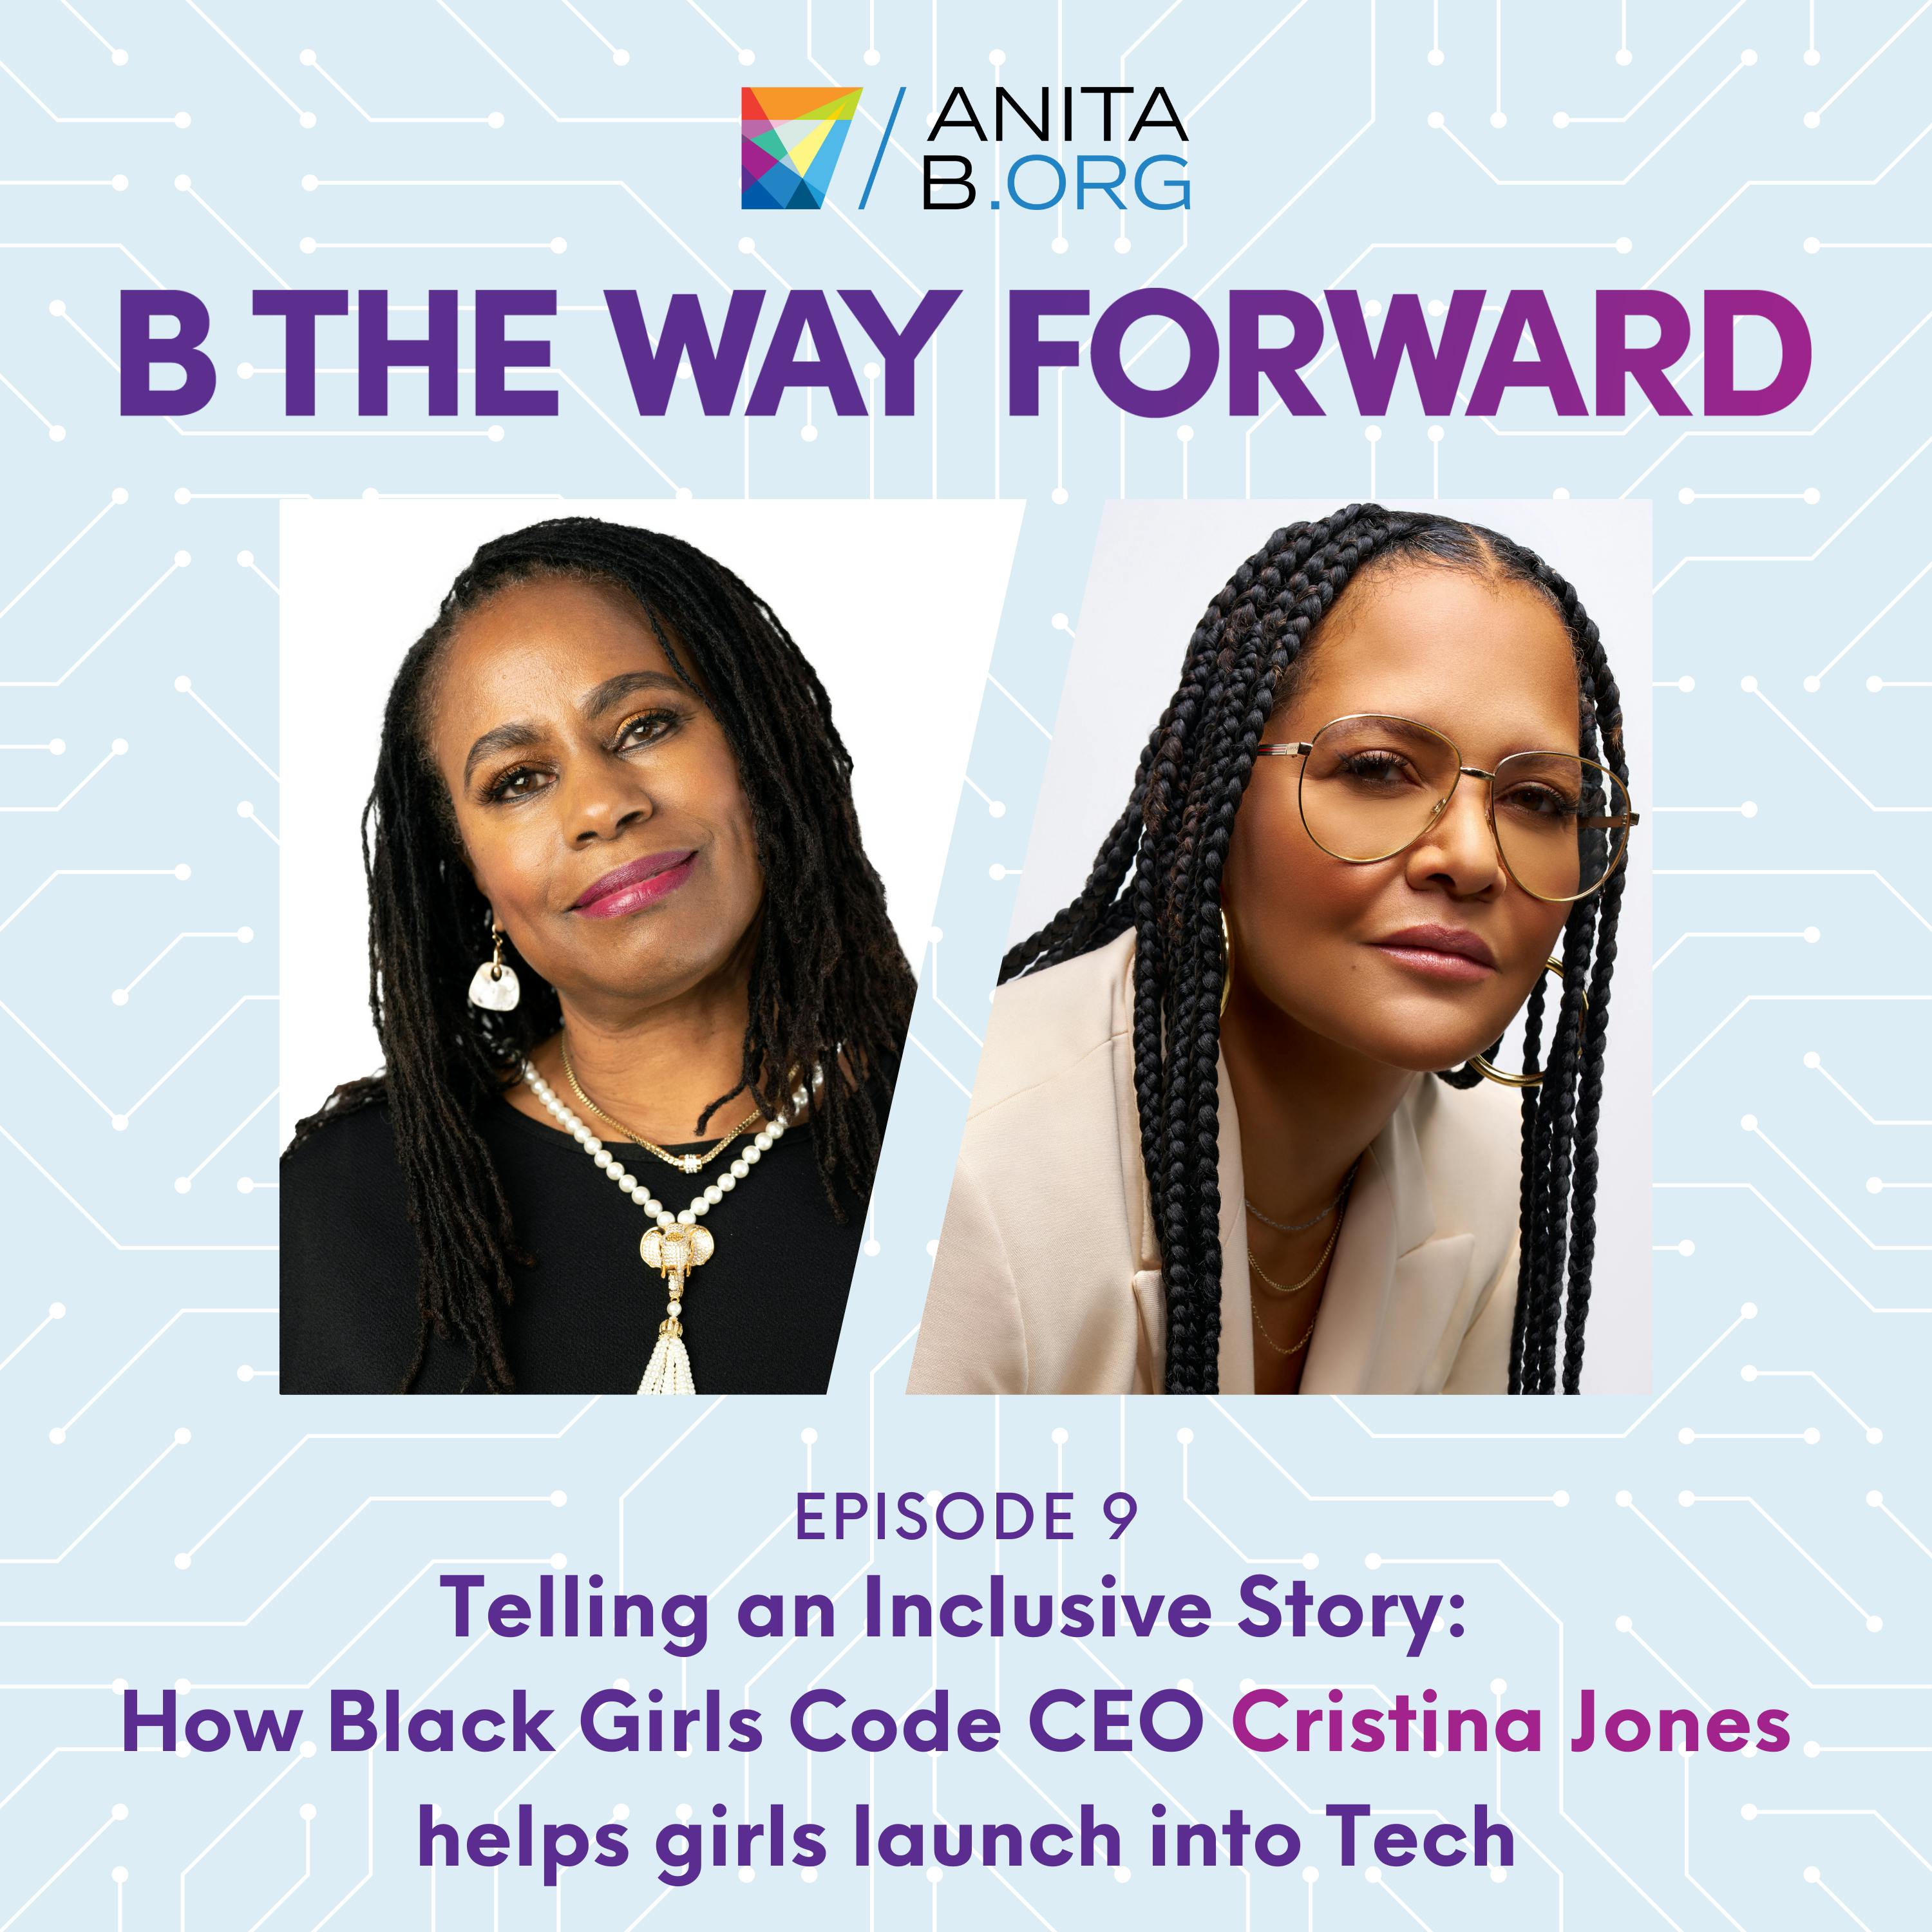 Telling an Inclusive Story: How Black Girls Code CEO Cristina Jones is Helping Girls Launch into Tech